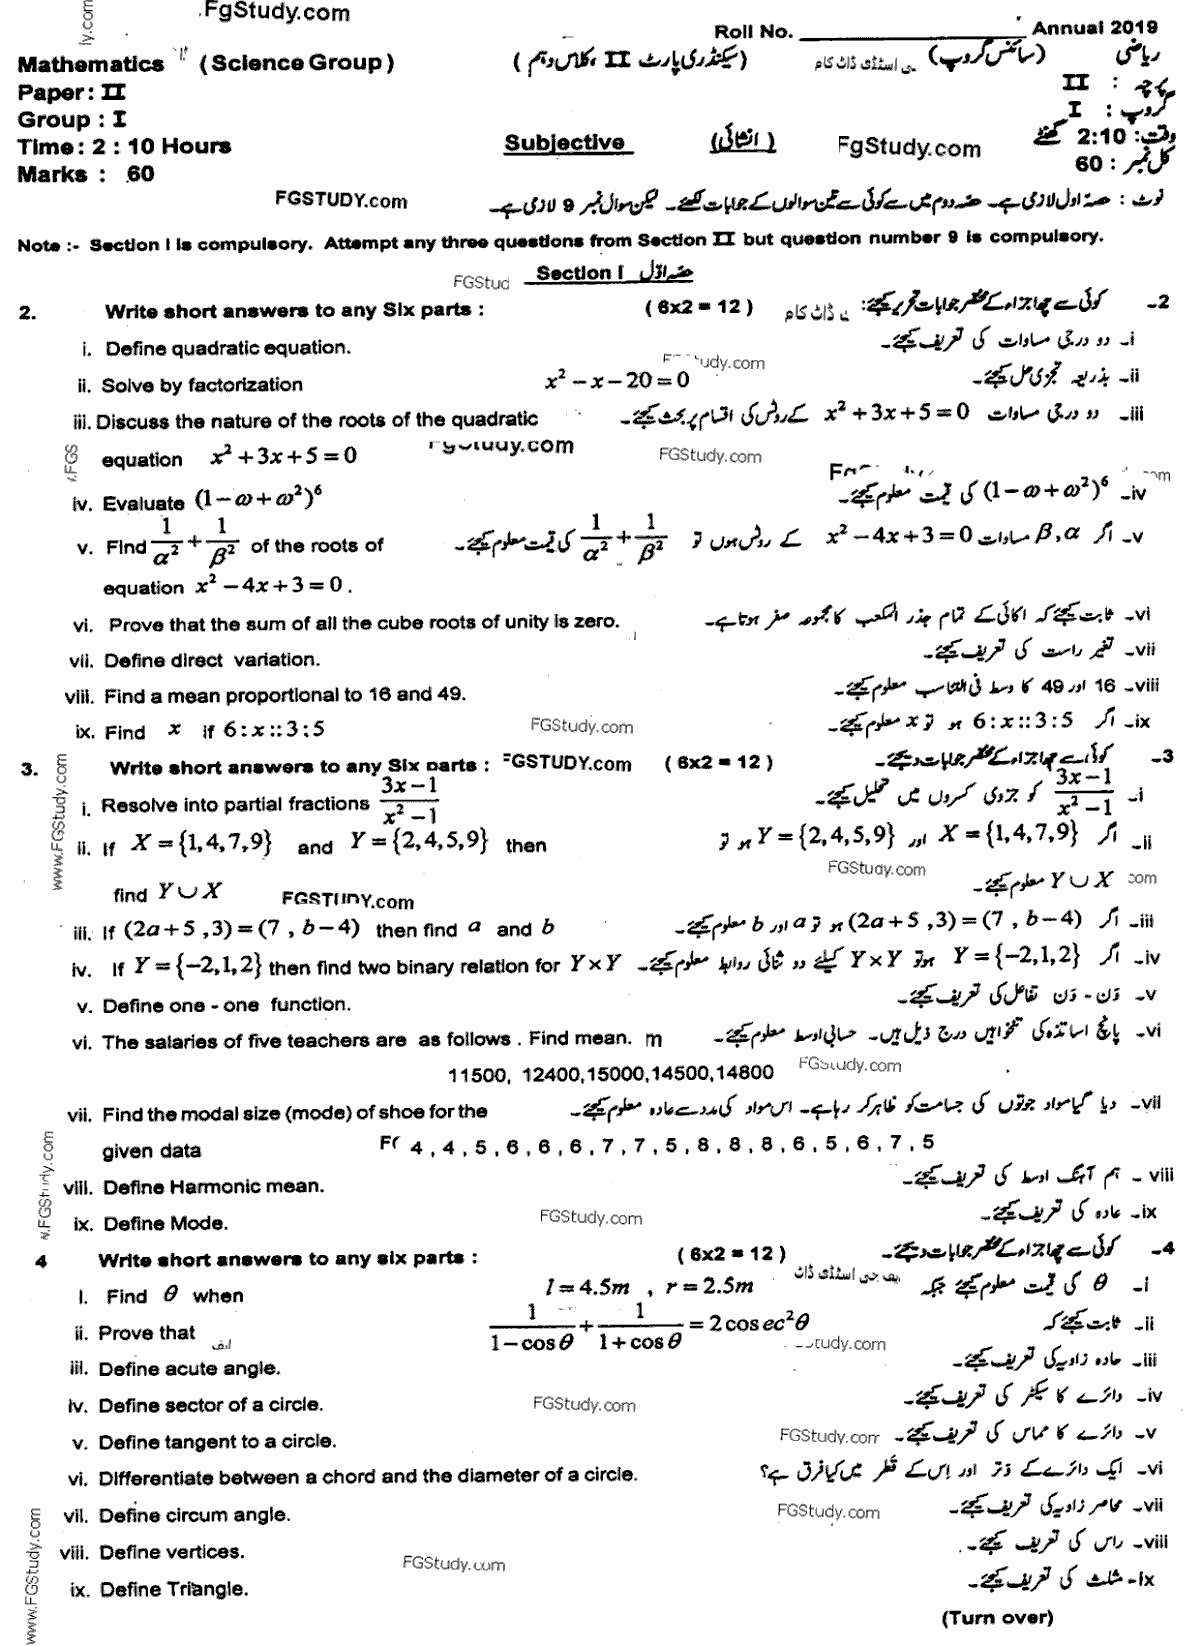 10th Class Math Past Paper 2019 Group 1 Subjective P1 Sahiwal Board